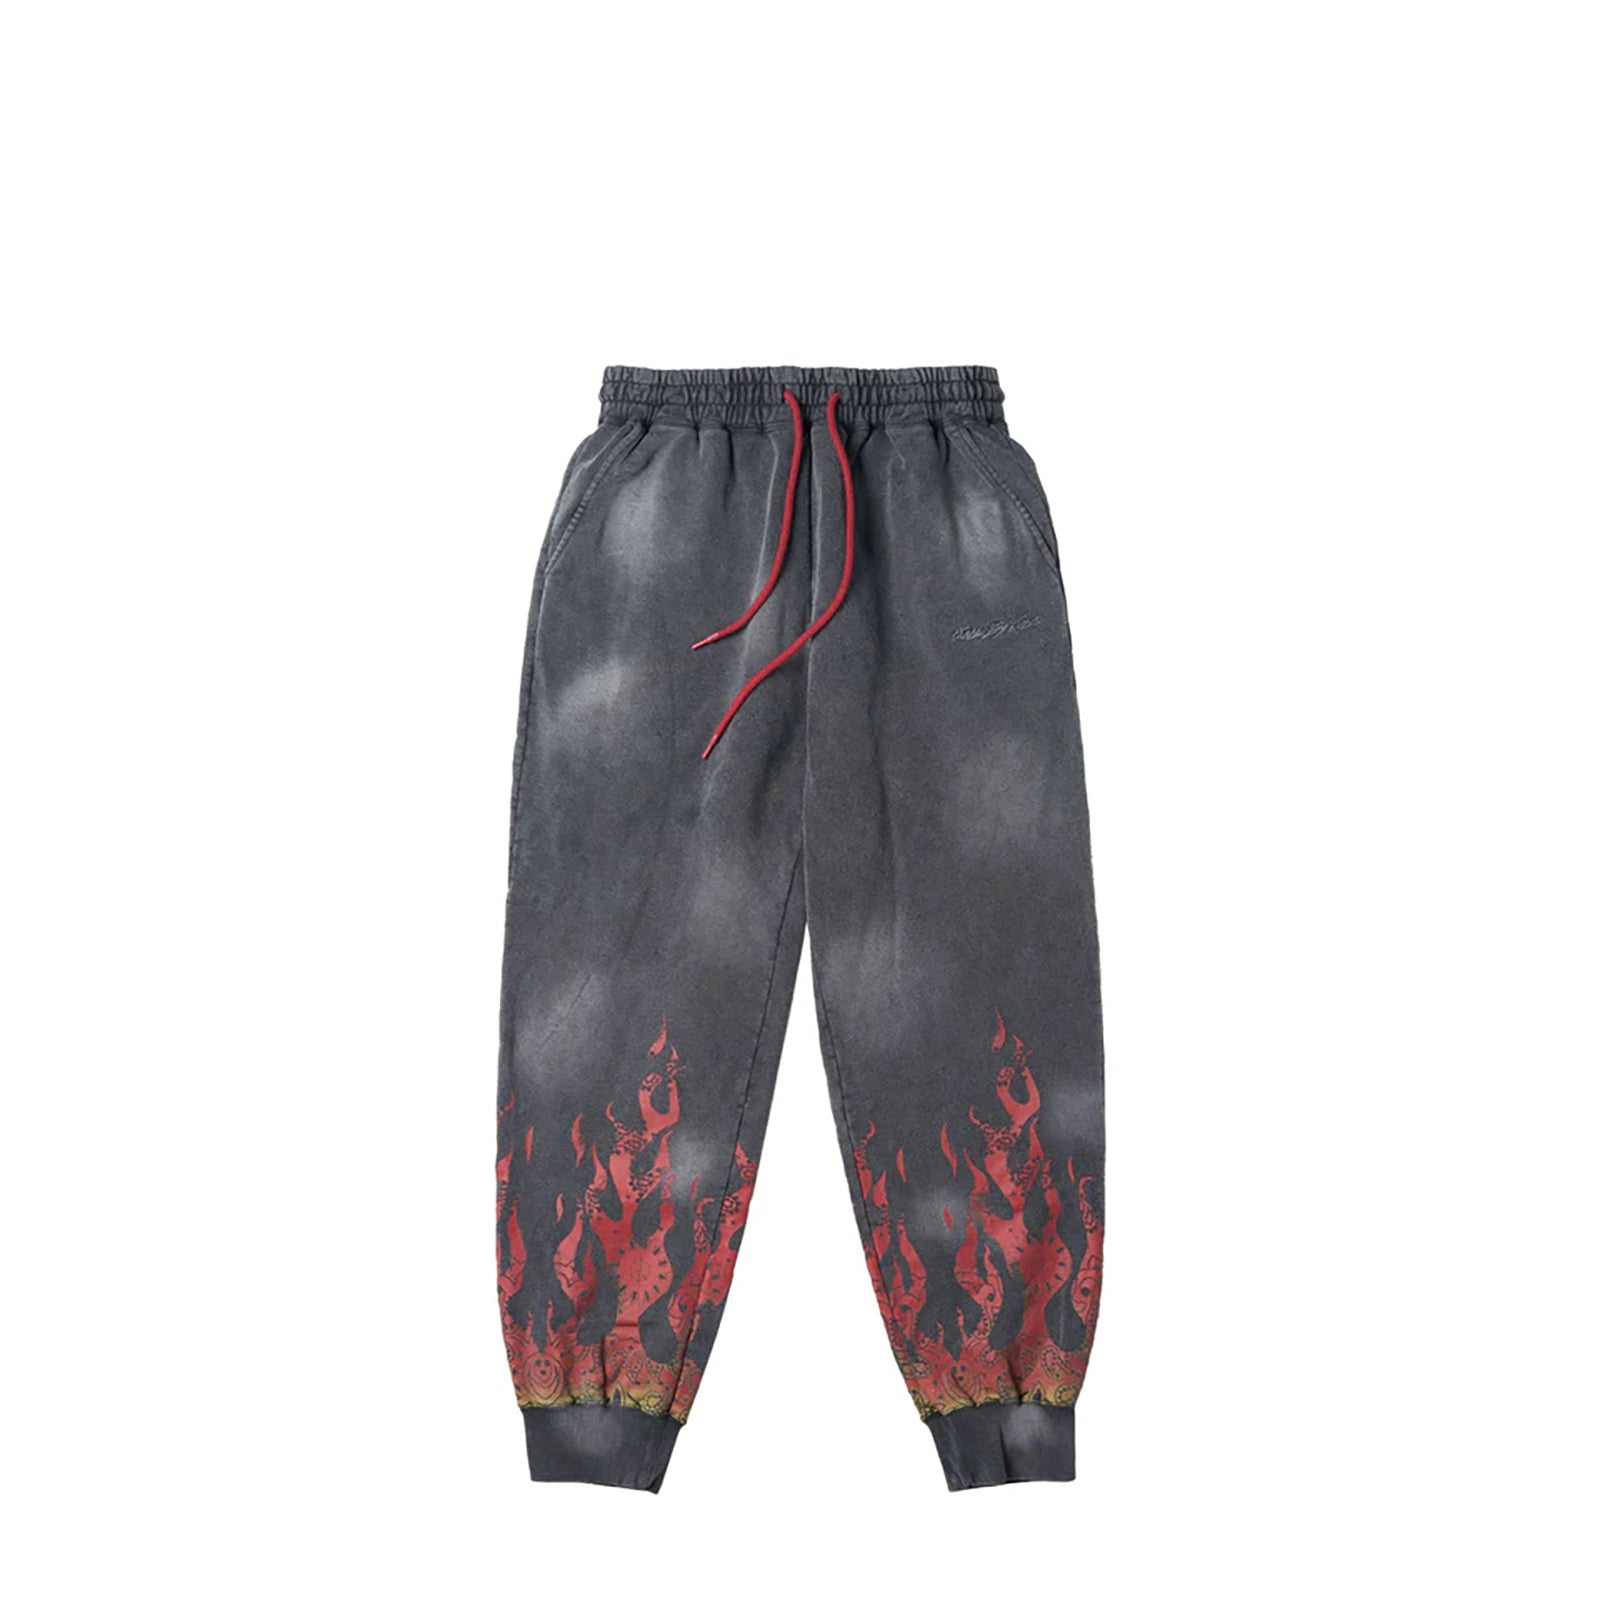 PBP Flaming Paisley Trousers